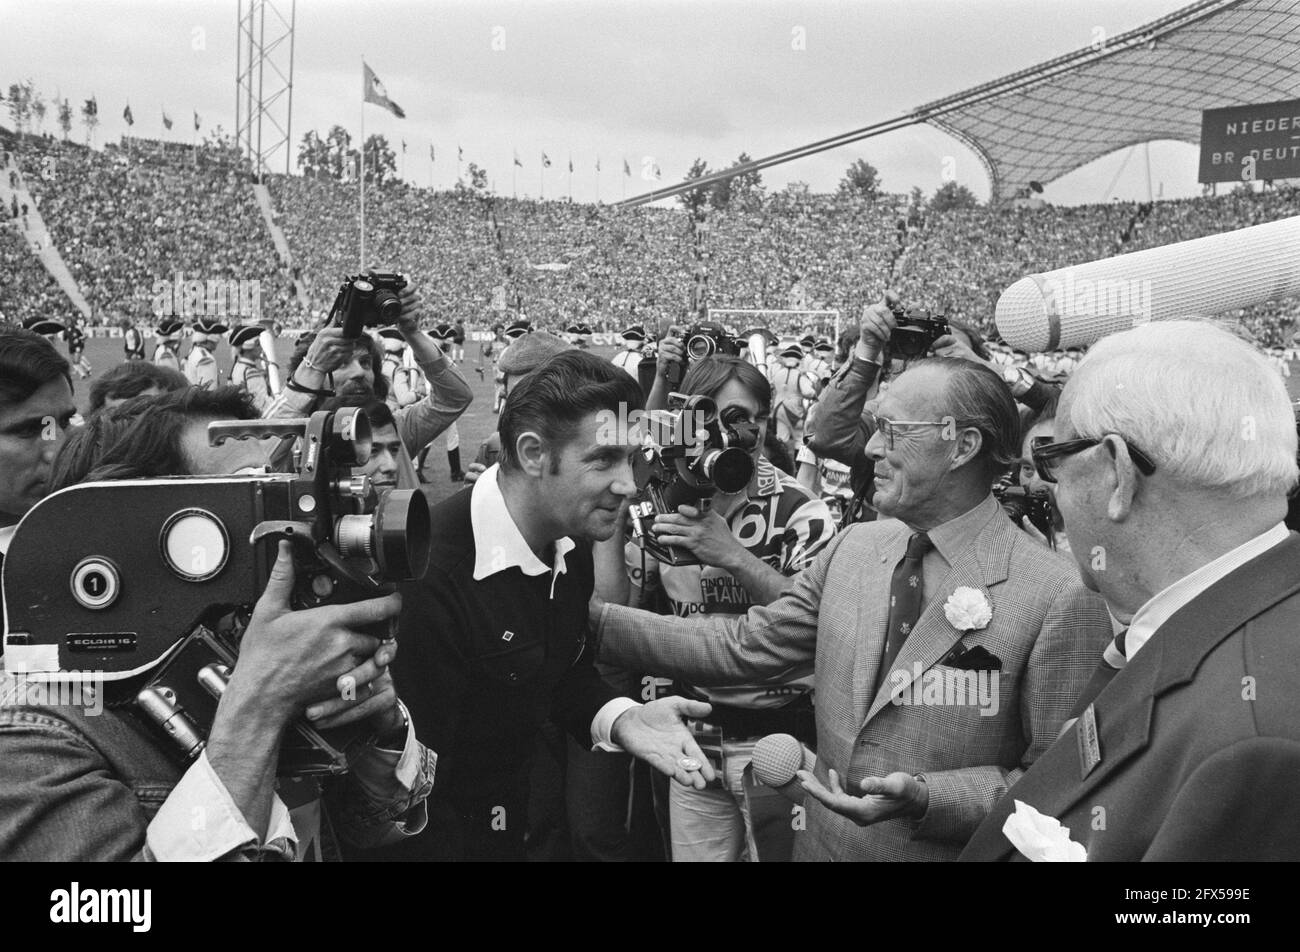 1974 World Cup final in Munich, West Germany v Netherlands 2-1; Prince Bernhard gives referee Jack Taylor World Wildlife Fund mascot, July 7, 1974, royal house, princes, referees, sports, soccer, The Netherlands, 20th century press agency photo, news to remember, documentary, historic photography 1945-1990, visual stories, human history of the Twentieth Century, capturing moments in time Stock Photo